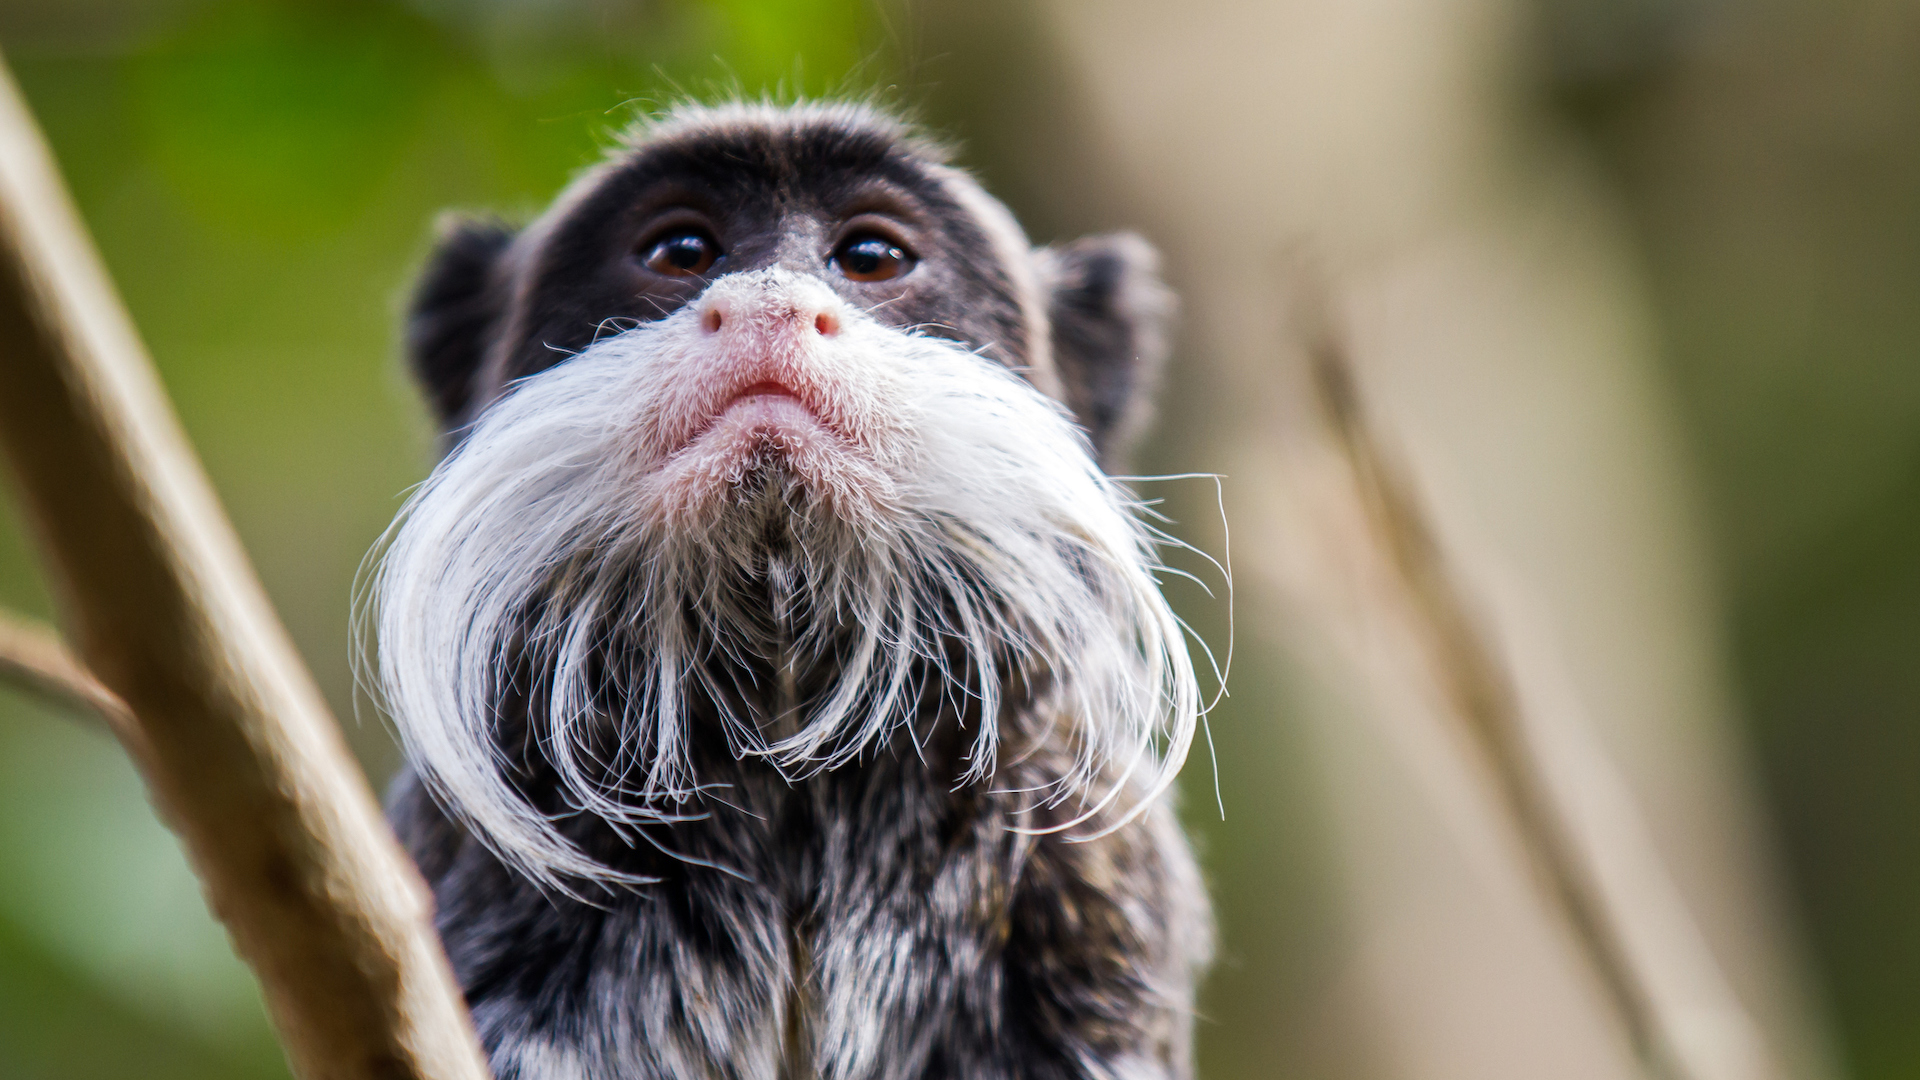 A close up of a tamarin monkey with a big moustache